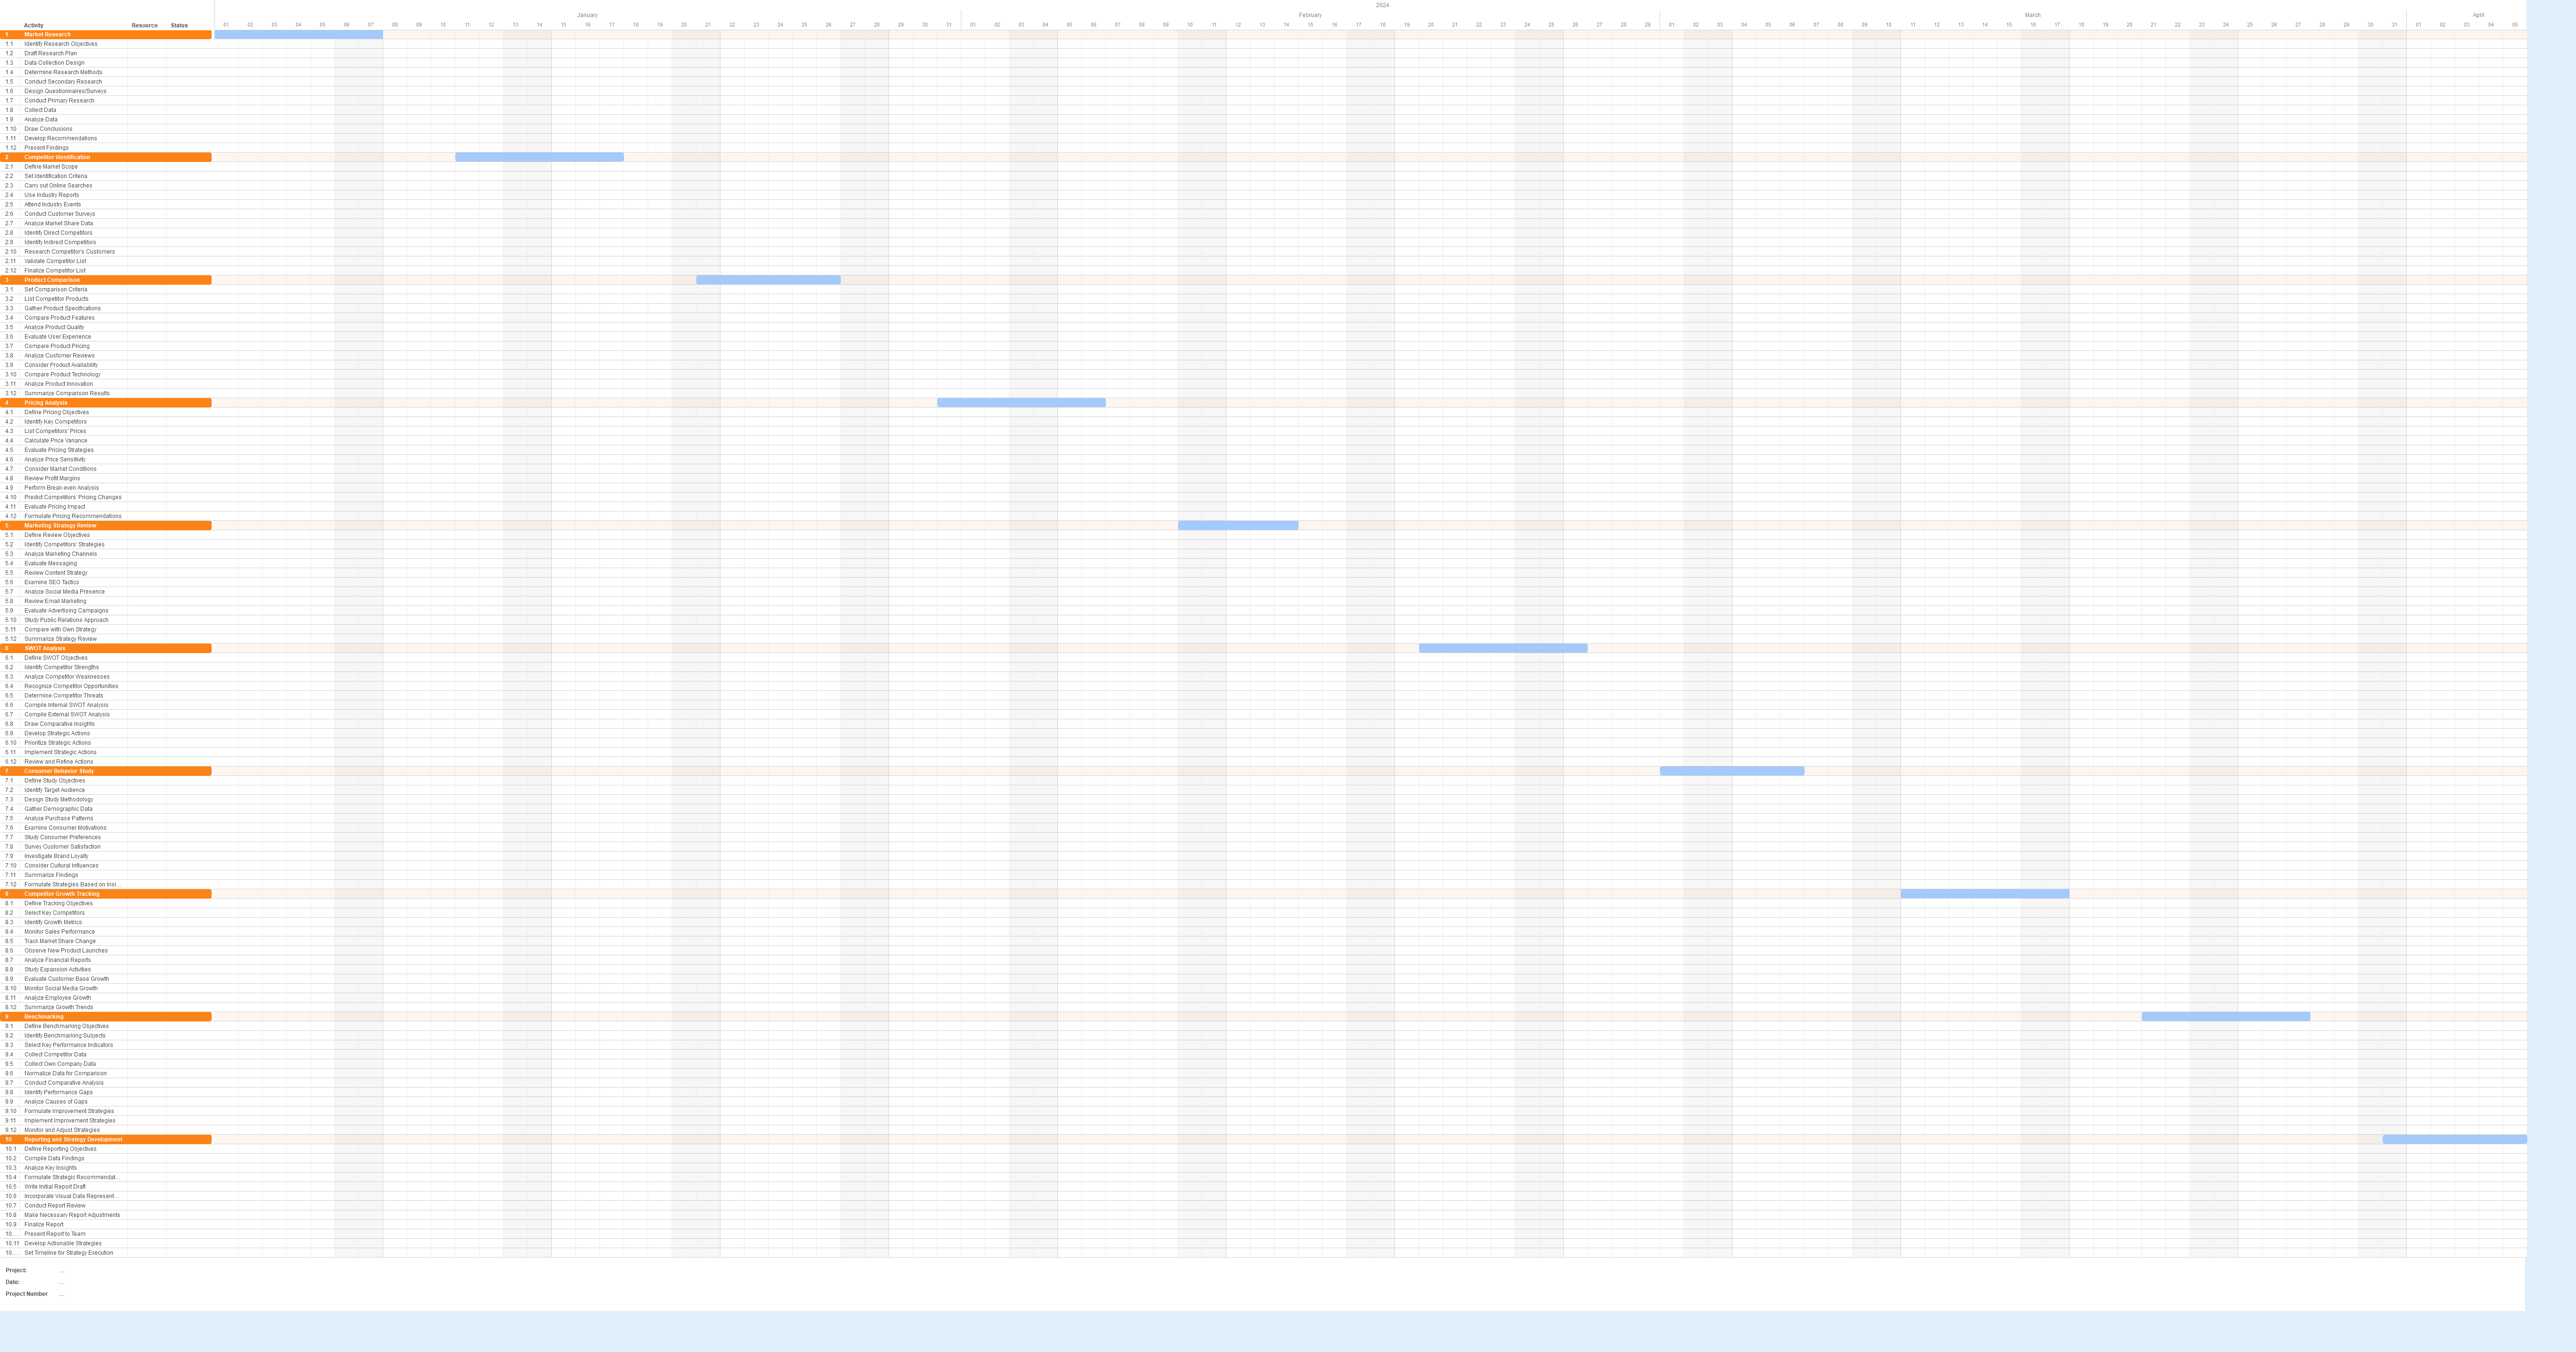 Gantt chart for a Competition Analysis project